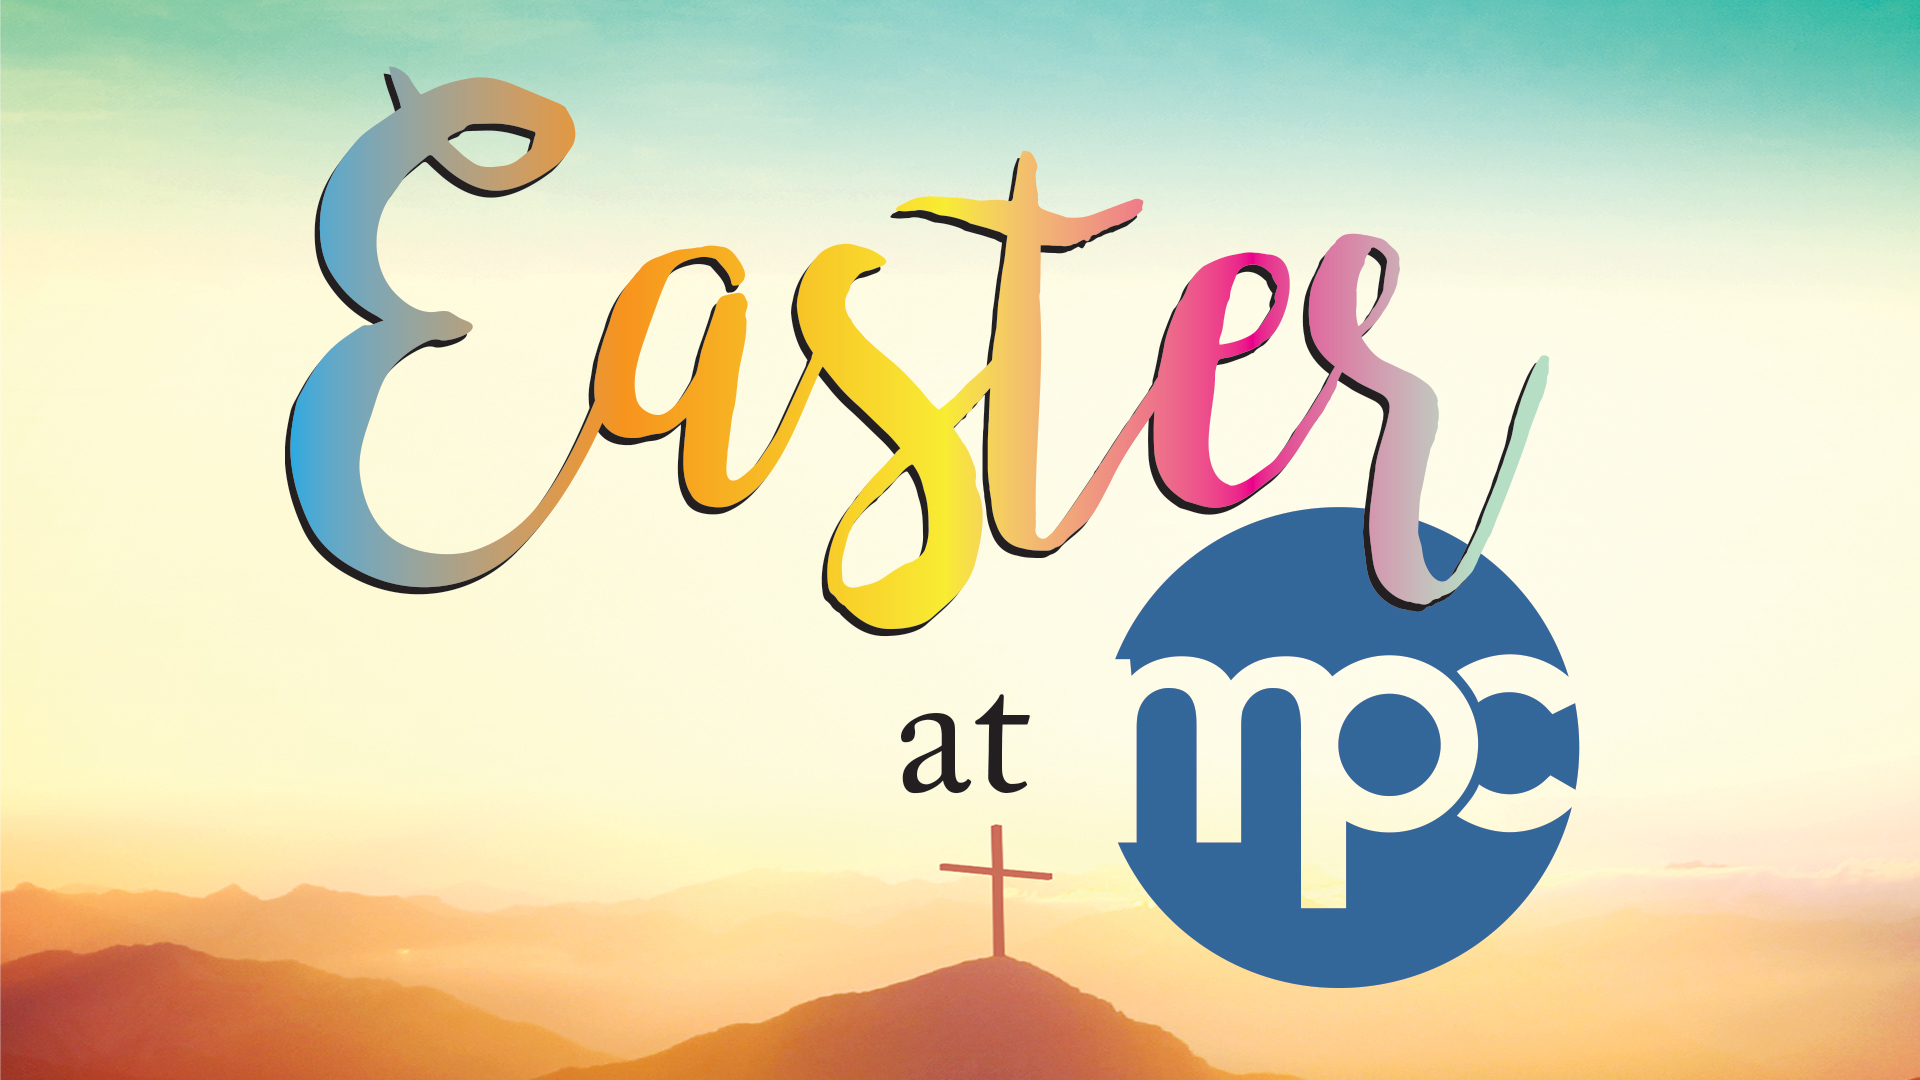 EASTER @ MPC

Check out our Easter events and services.
